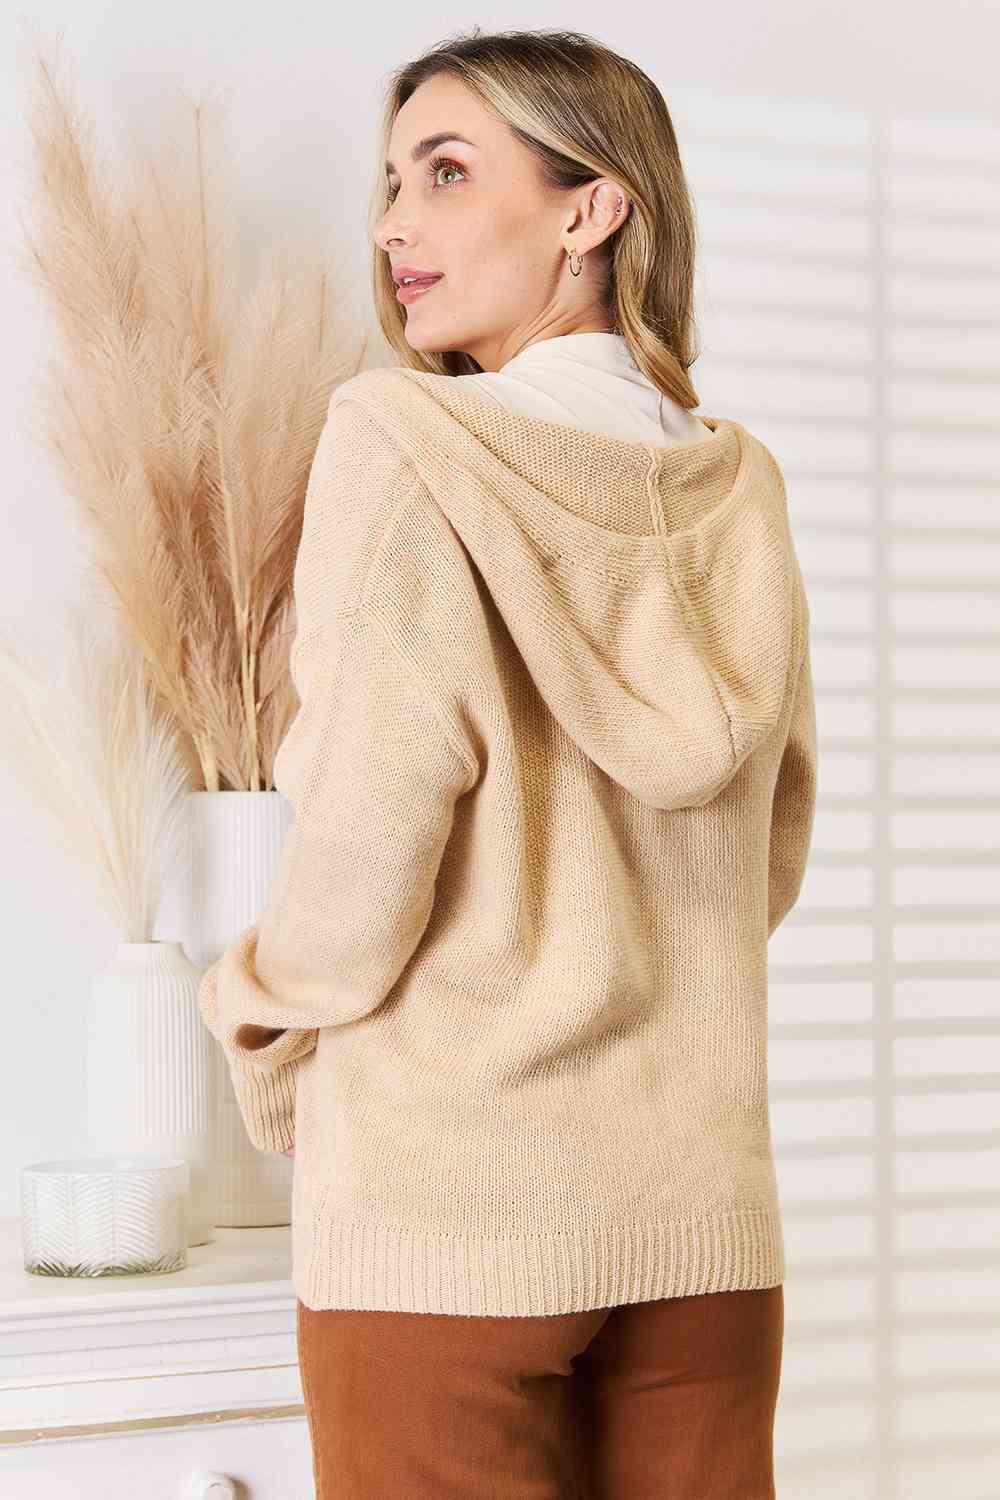 Woven Right Button-Down Long Sleeve Hooded Sweater